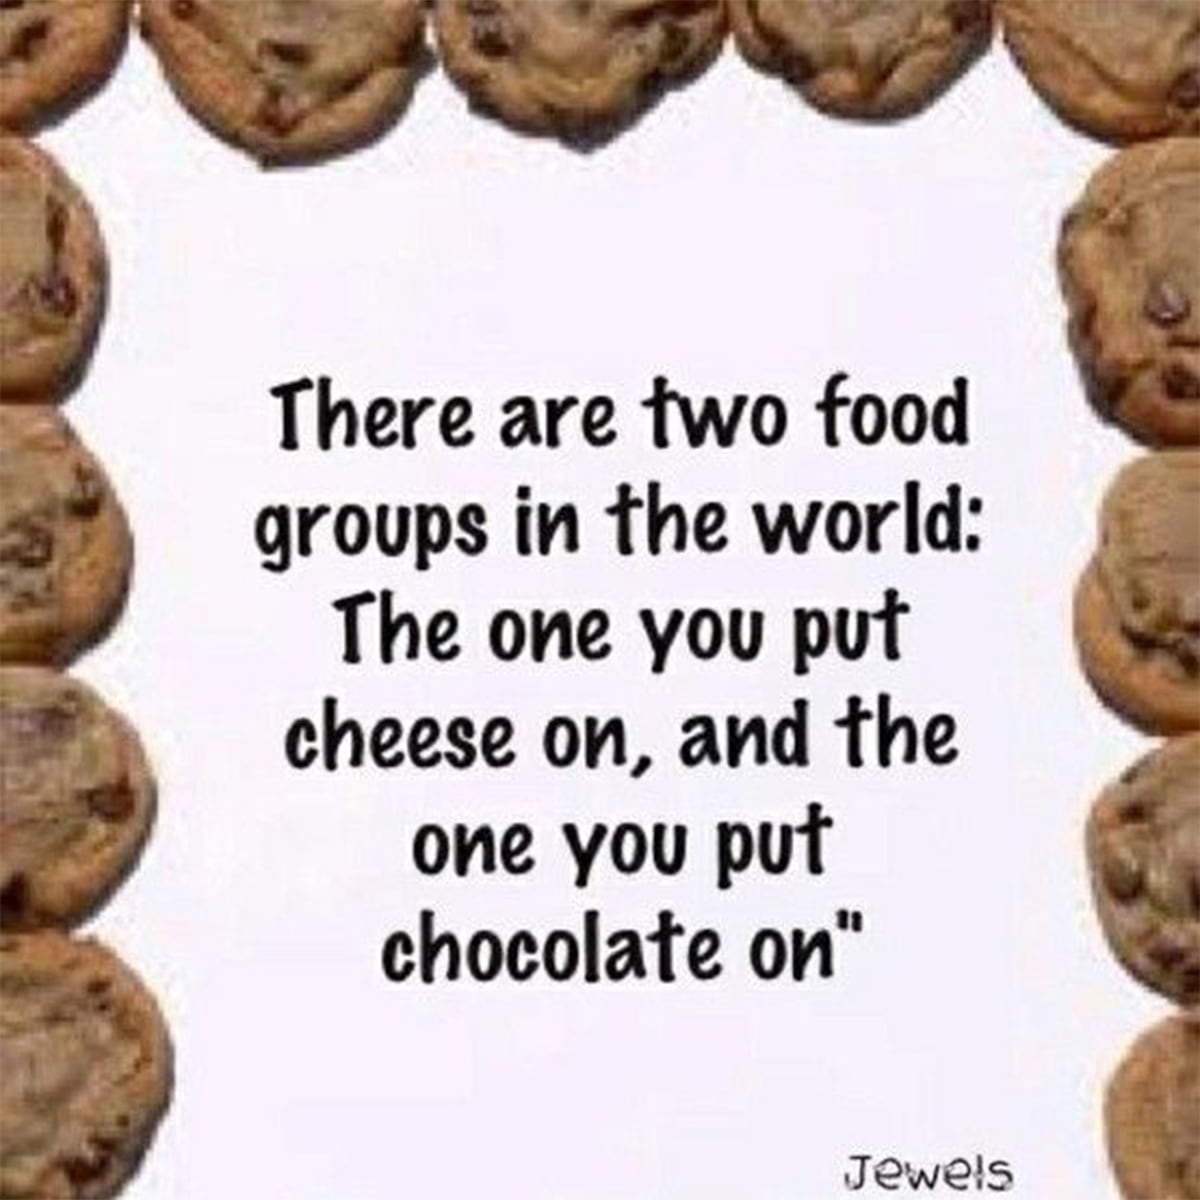 There are two food groups in the world: The one you put cheese on and the one you put chocolate on.